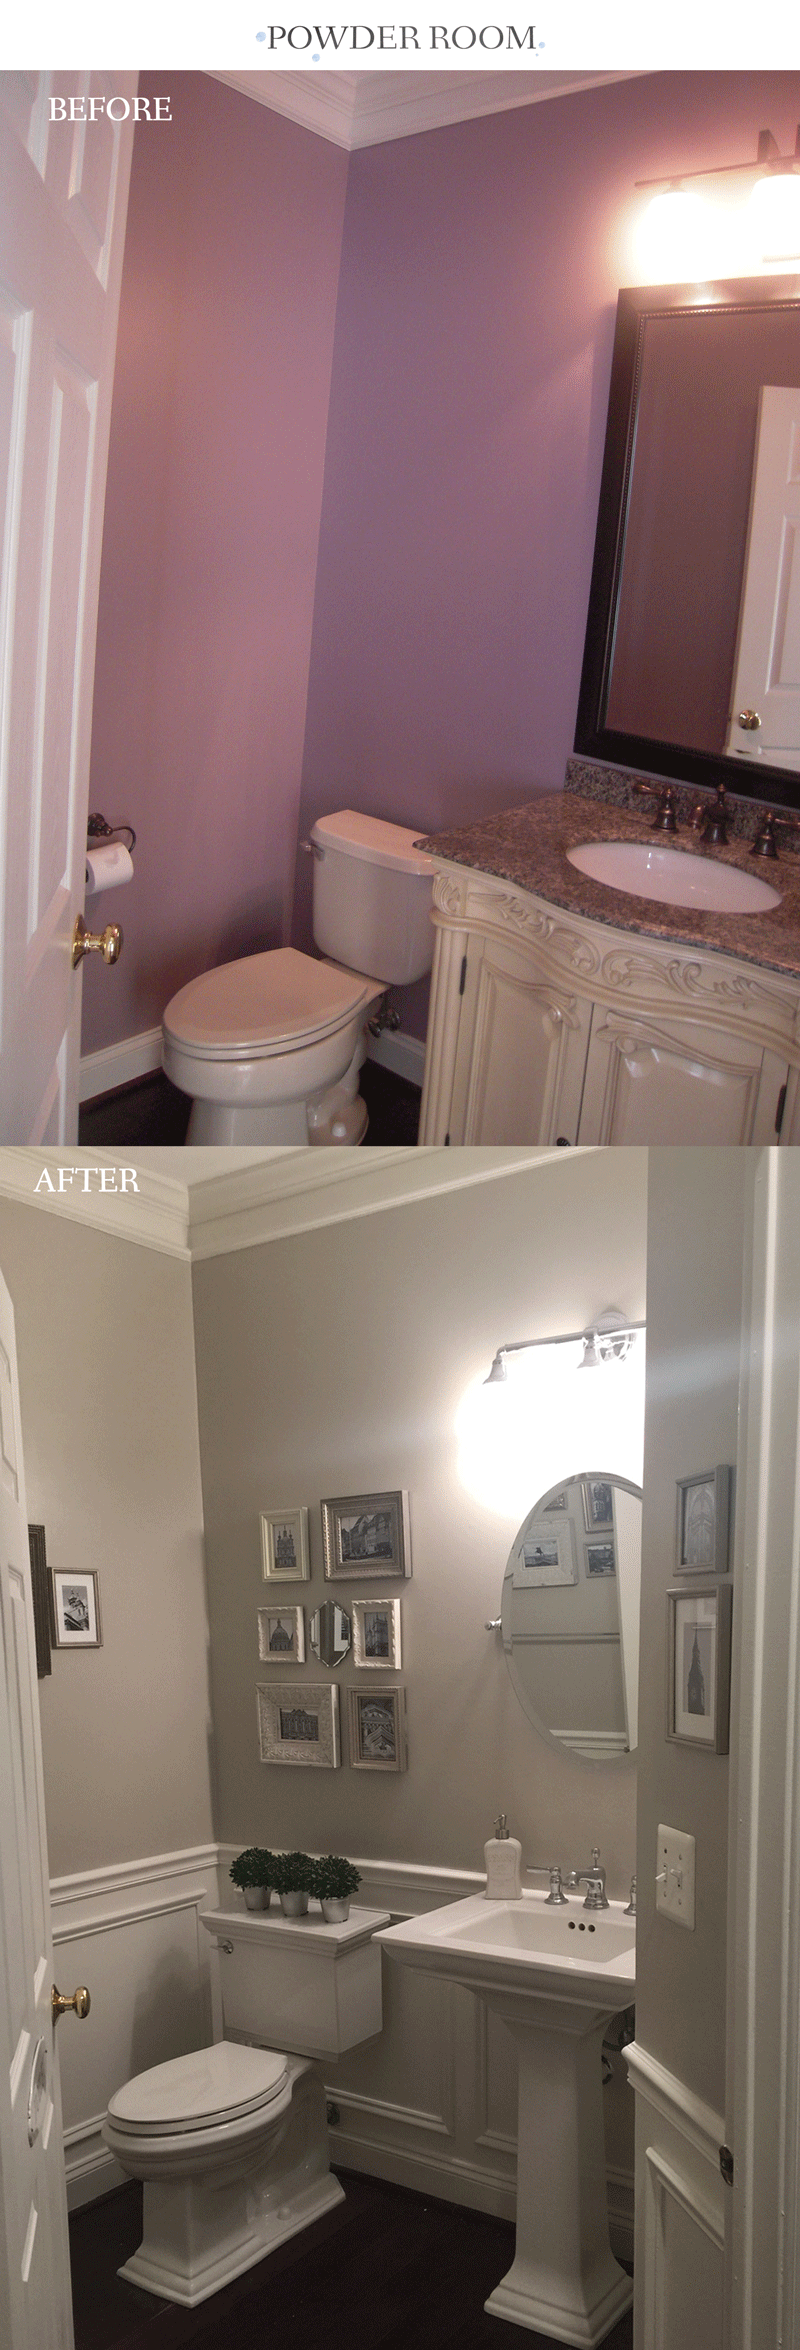 Powder room before and after wainscoting and makeover. The gray paint is Benjamin Moore Revere Pewter.